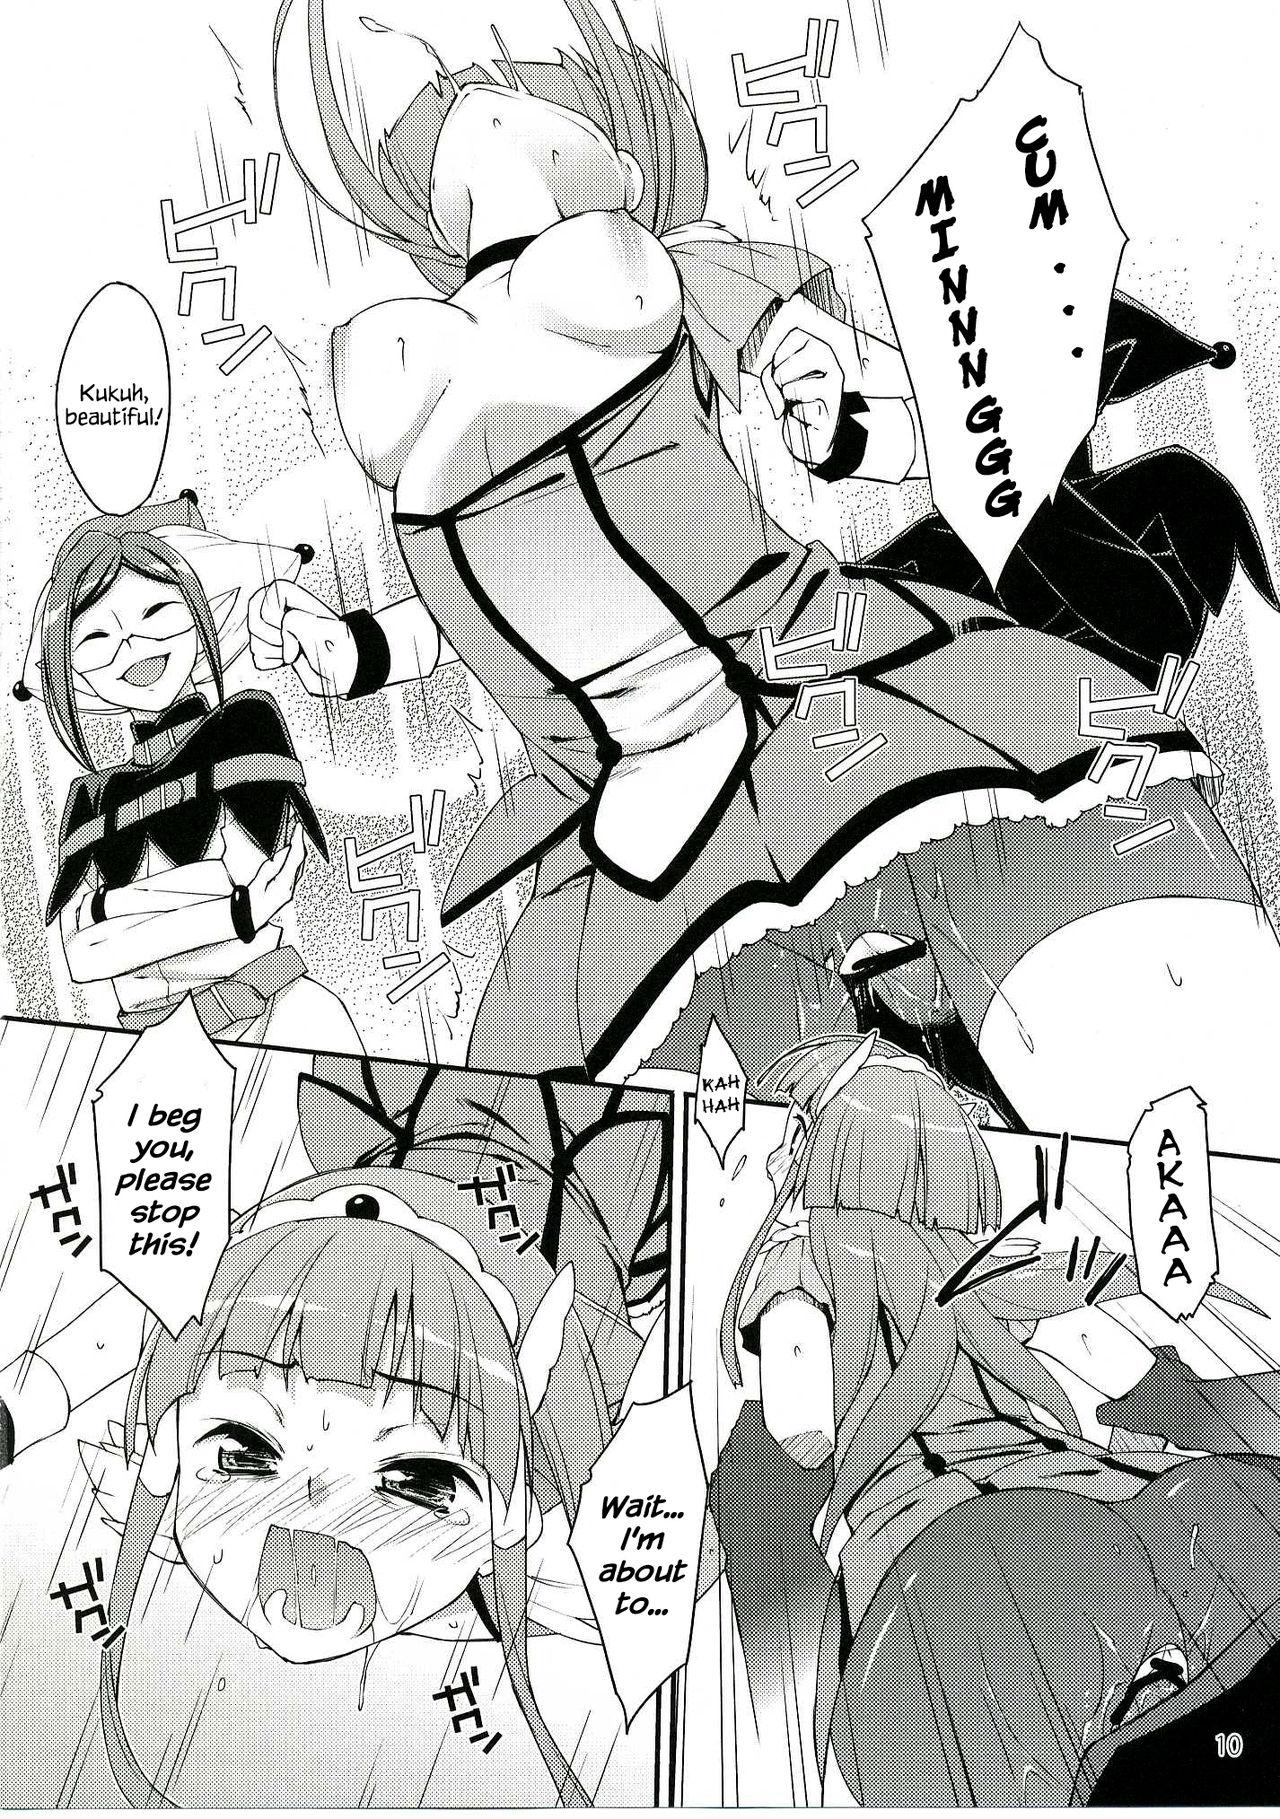 Movie Bad End Beauty - Smile precure Blowjob - Page 9